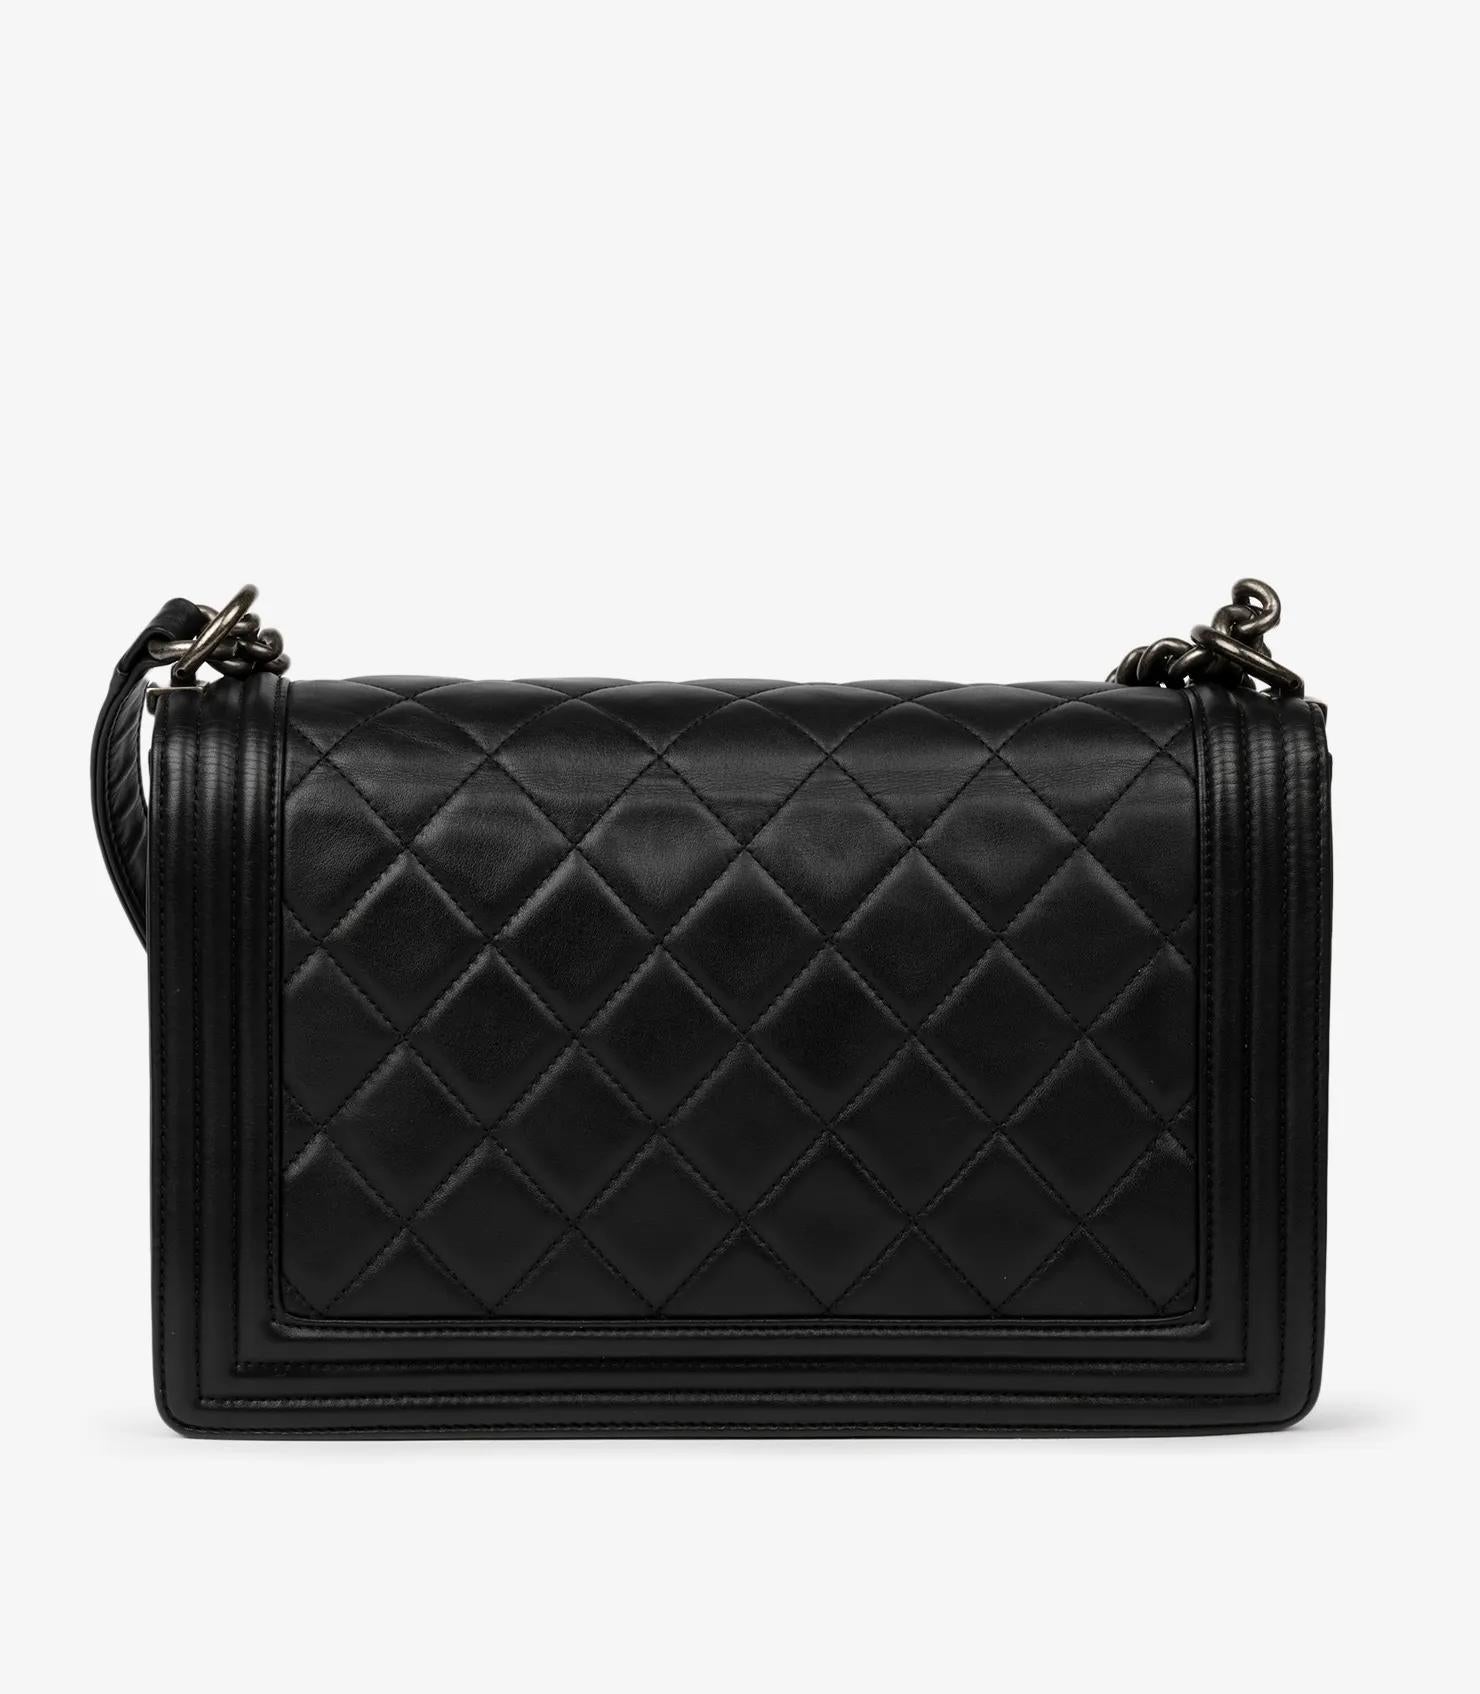 Chanel Black Quilted Lambskin Leather Large Le Boy Bag 2